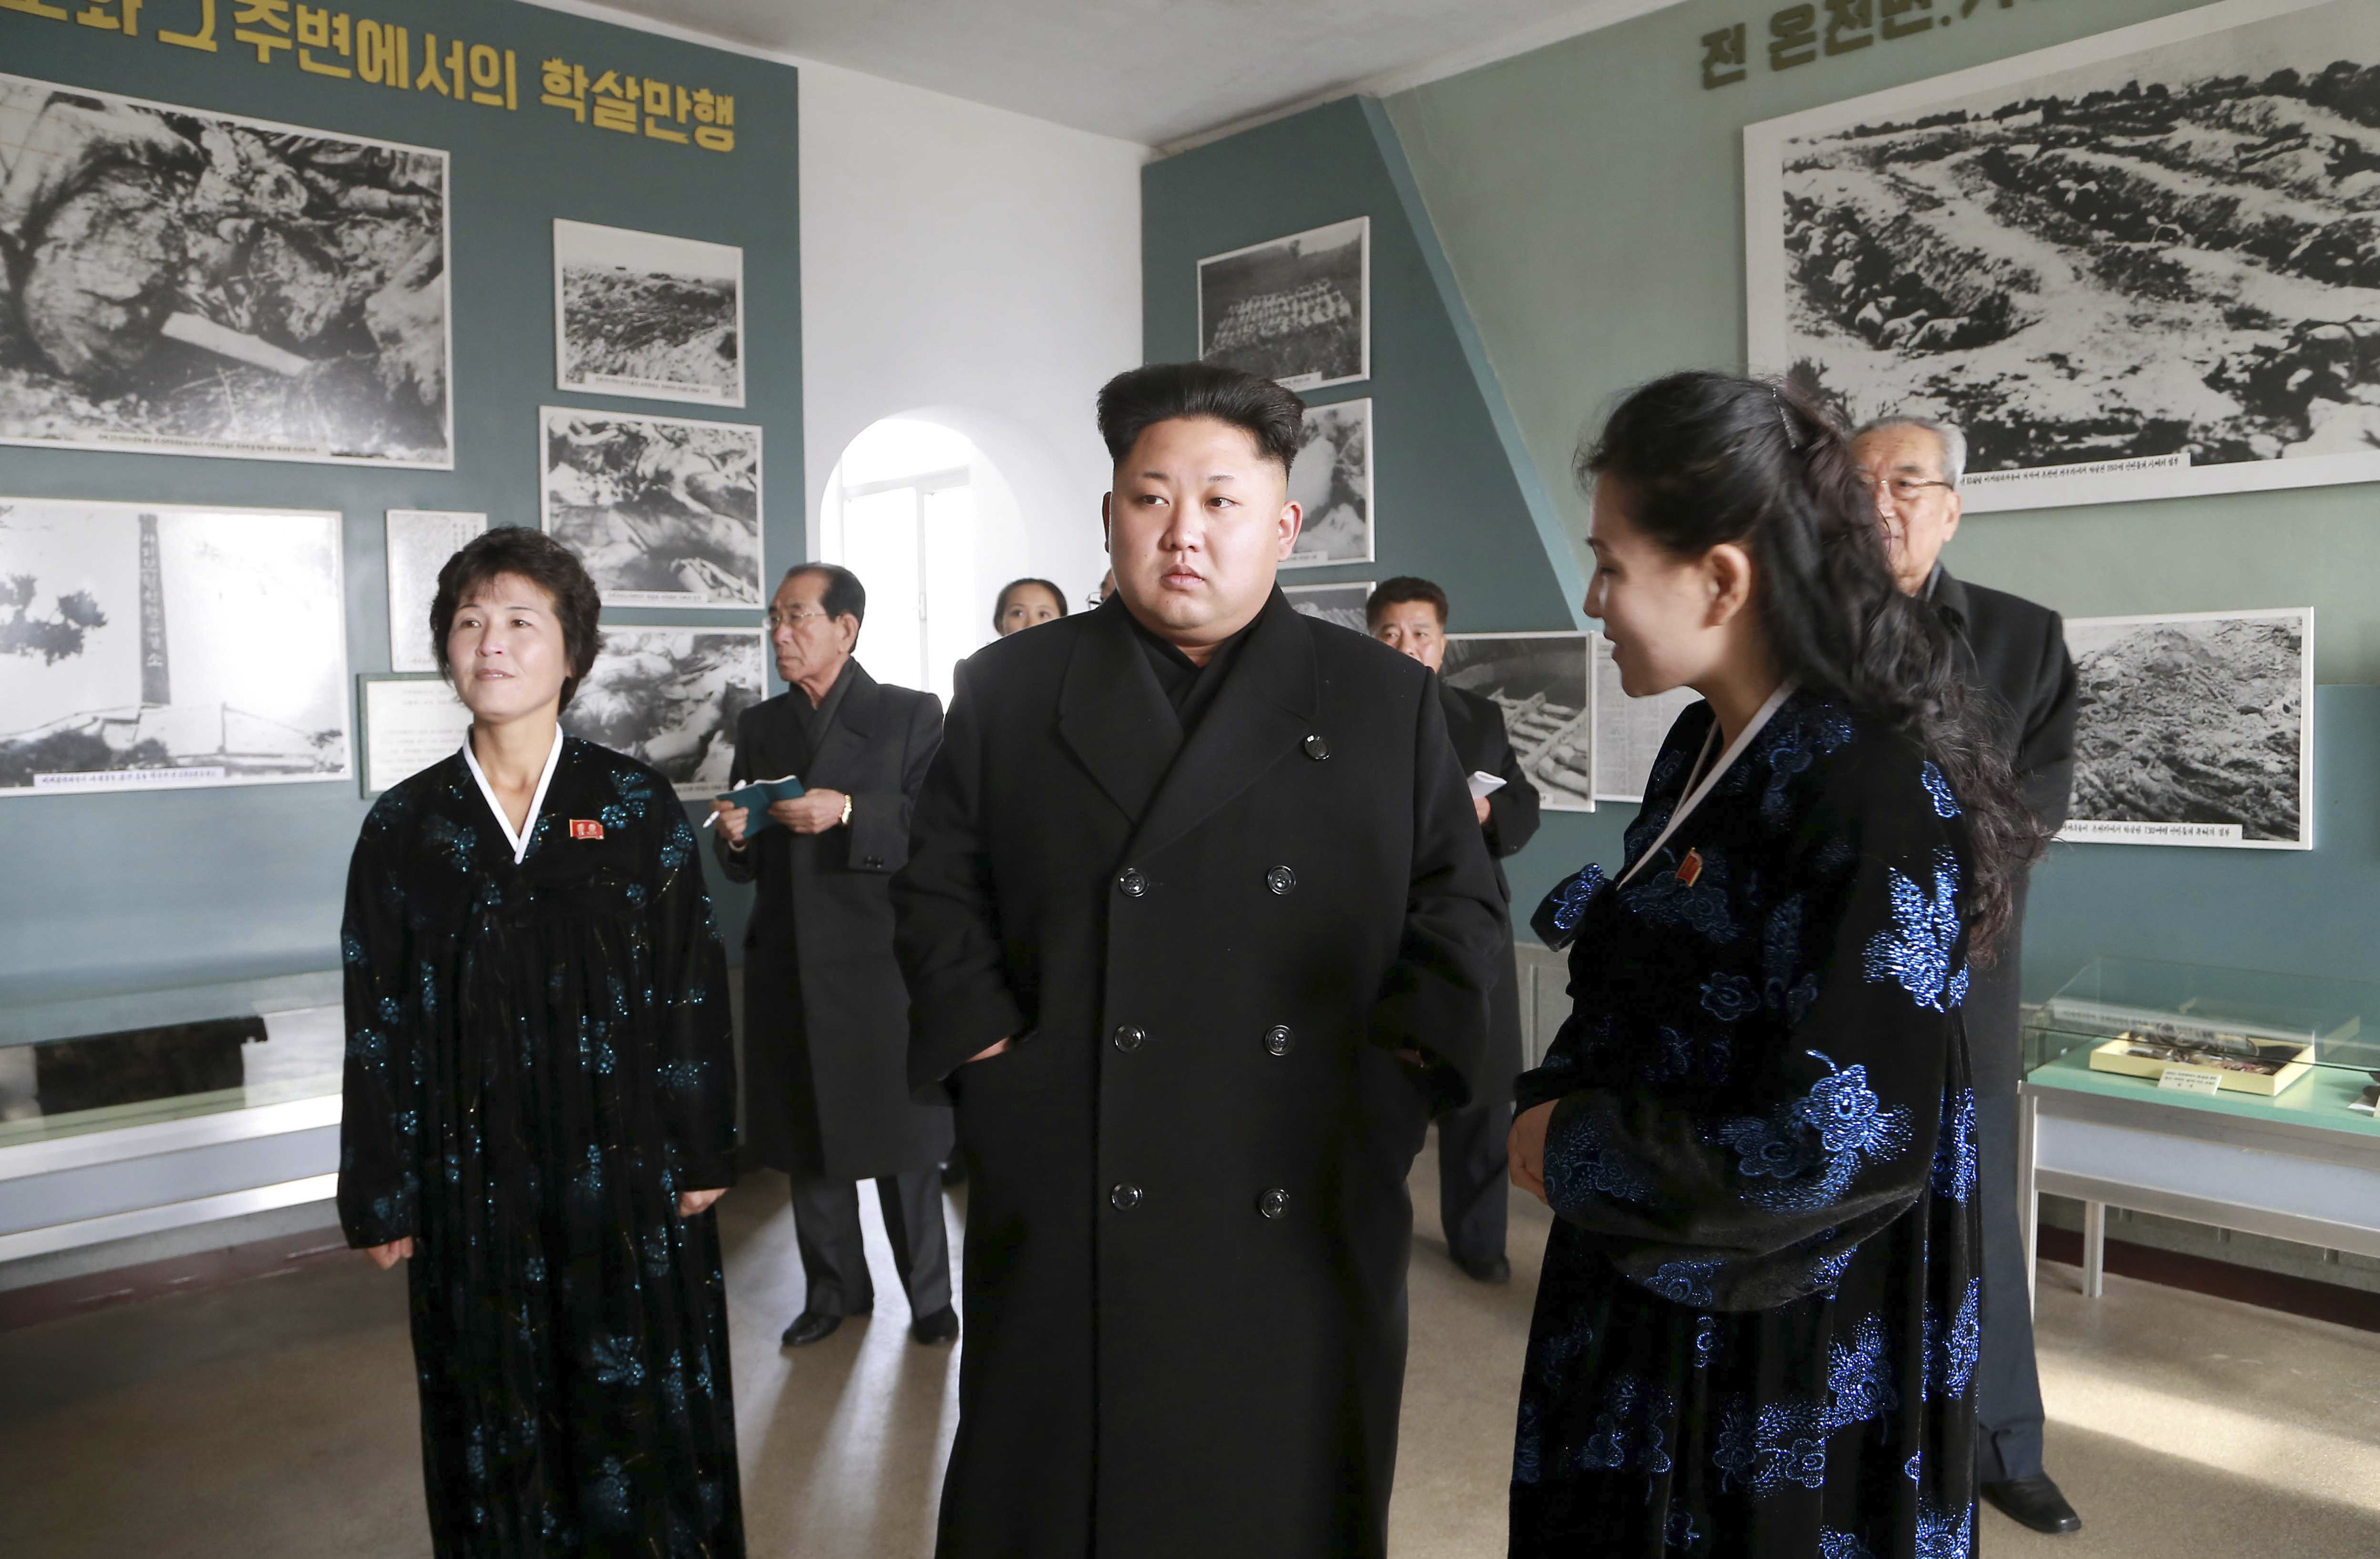 North Korean leader Kim Jong Un gives field guidance to the Sinchon Museum